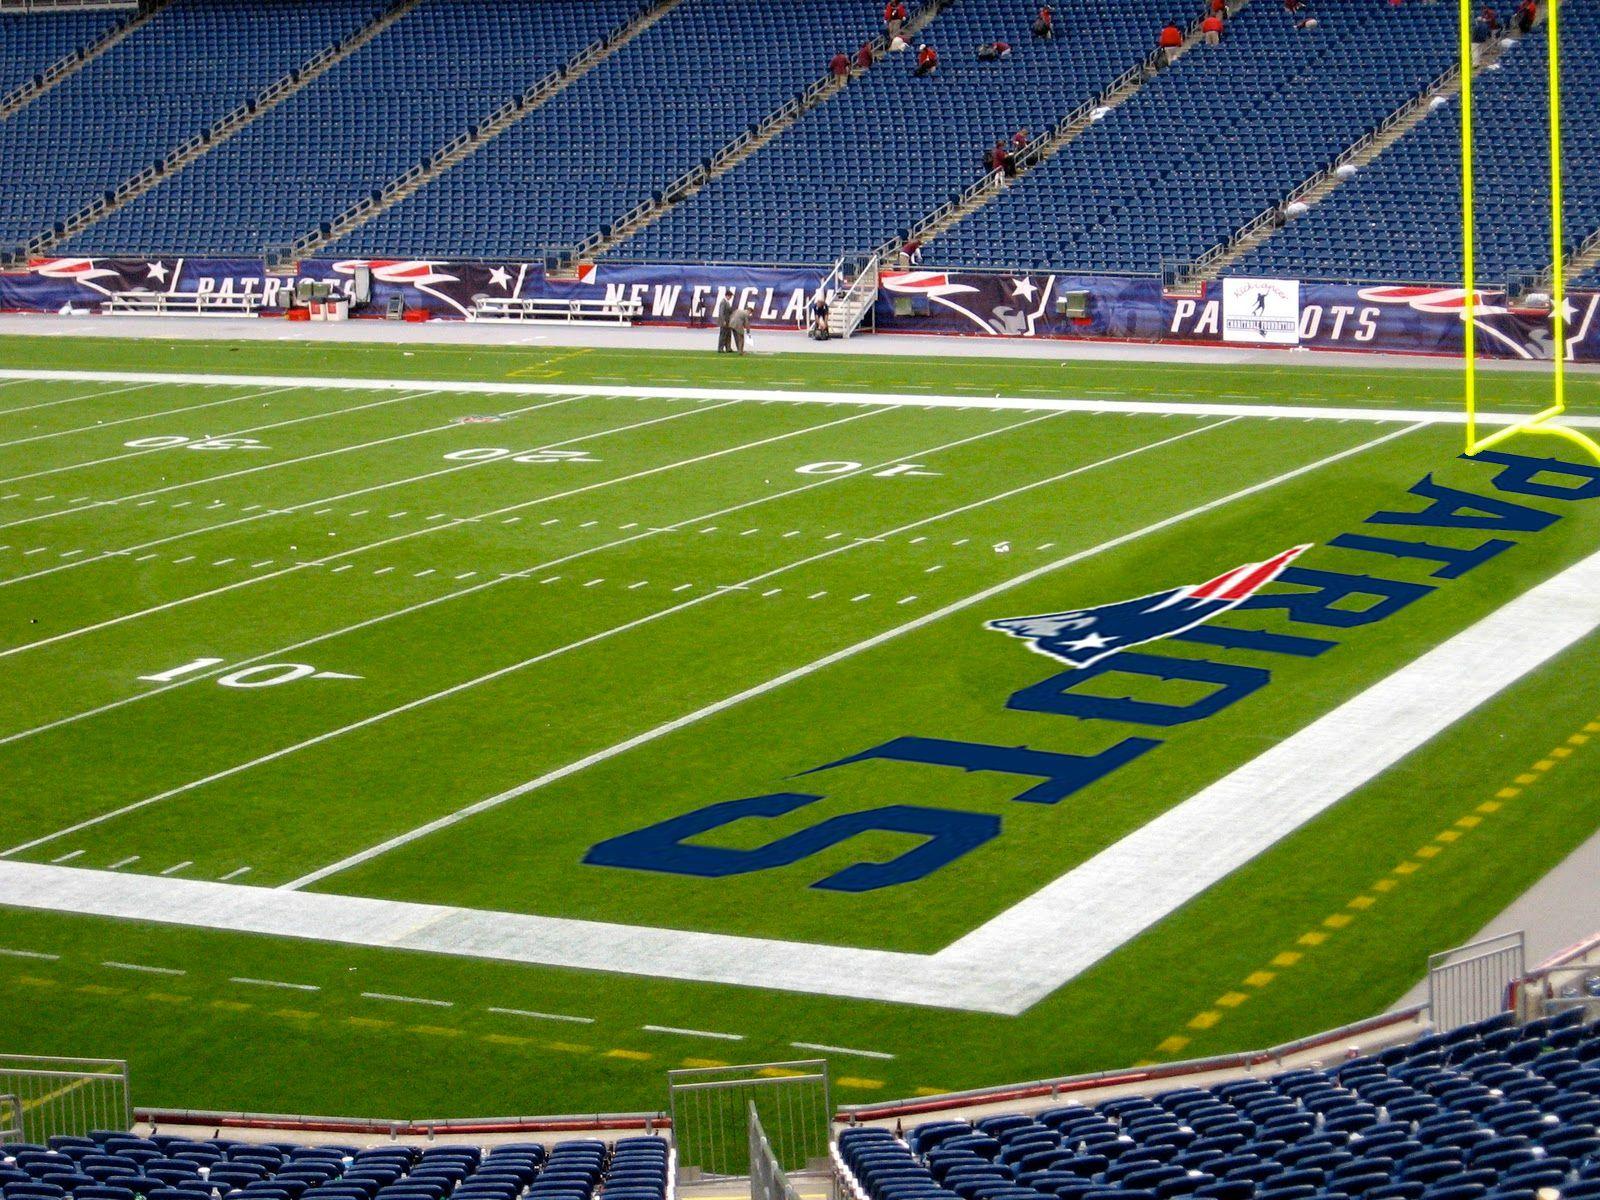 Patriots End Zone Logo - After seeing the new Endzone logo, I used Photoshop to see how it ...